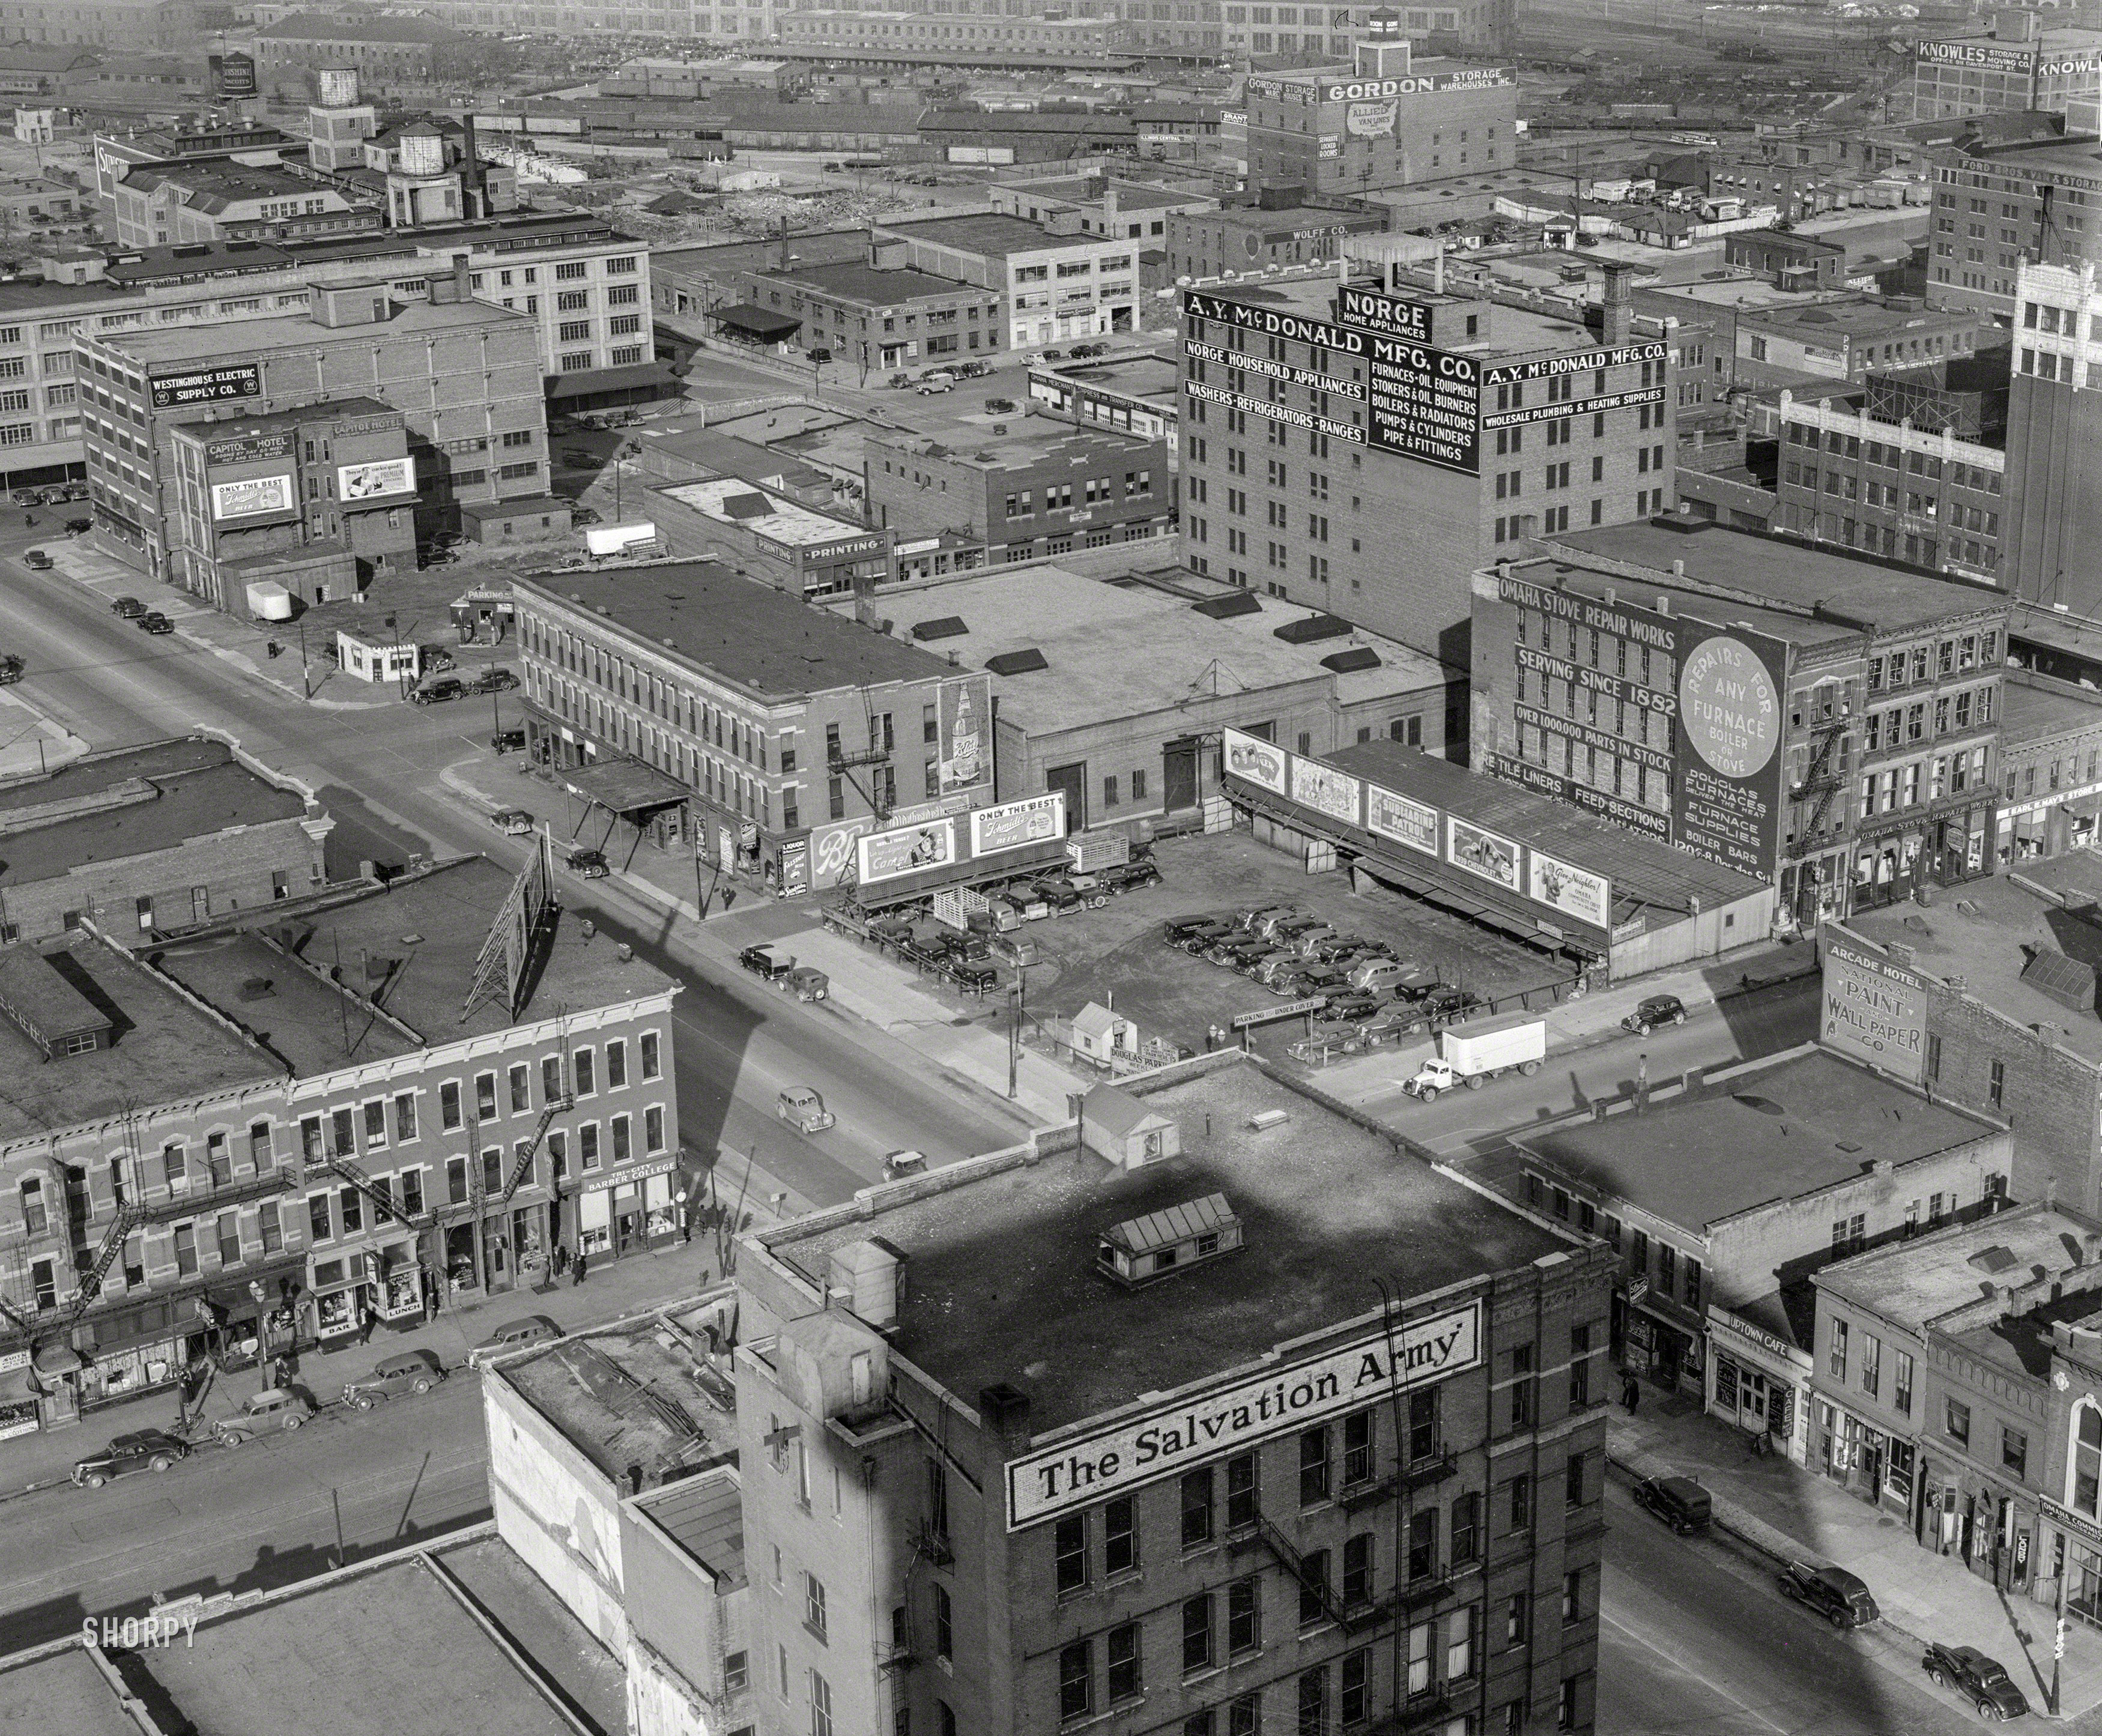 November 1938. "Omaha, Nebraska." A bird's-eye view of, among other attractions, Tri-City Barber College. Photo by John Vachon for the Farm Security Administration. View full size.